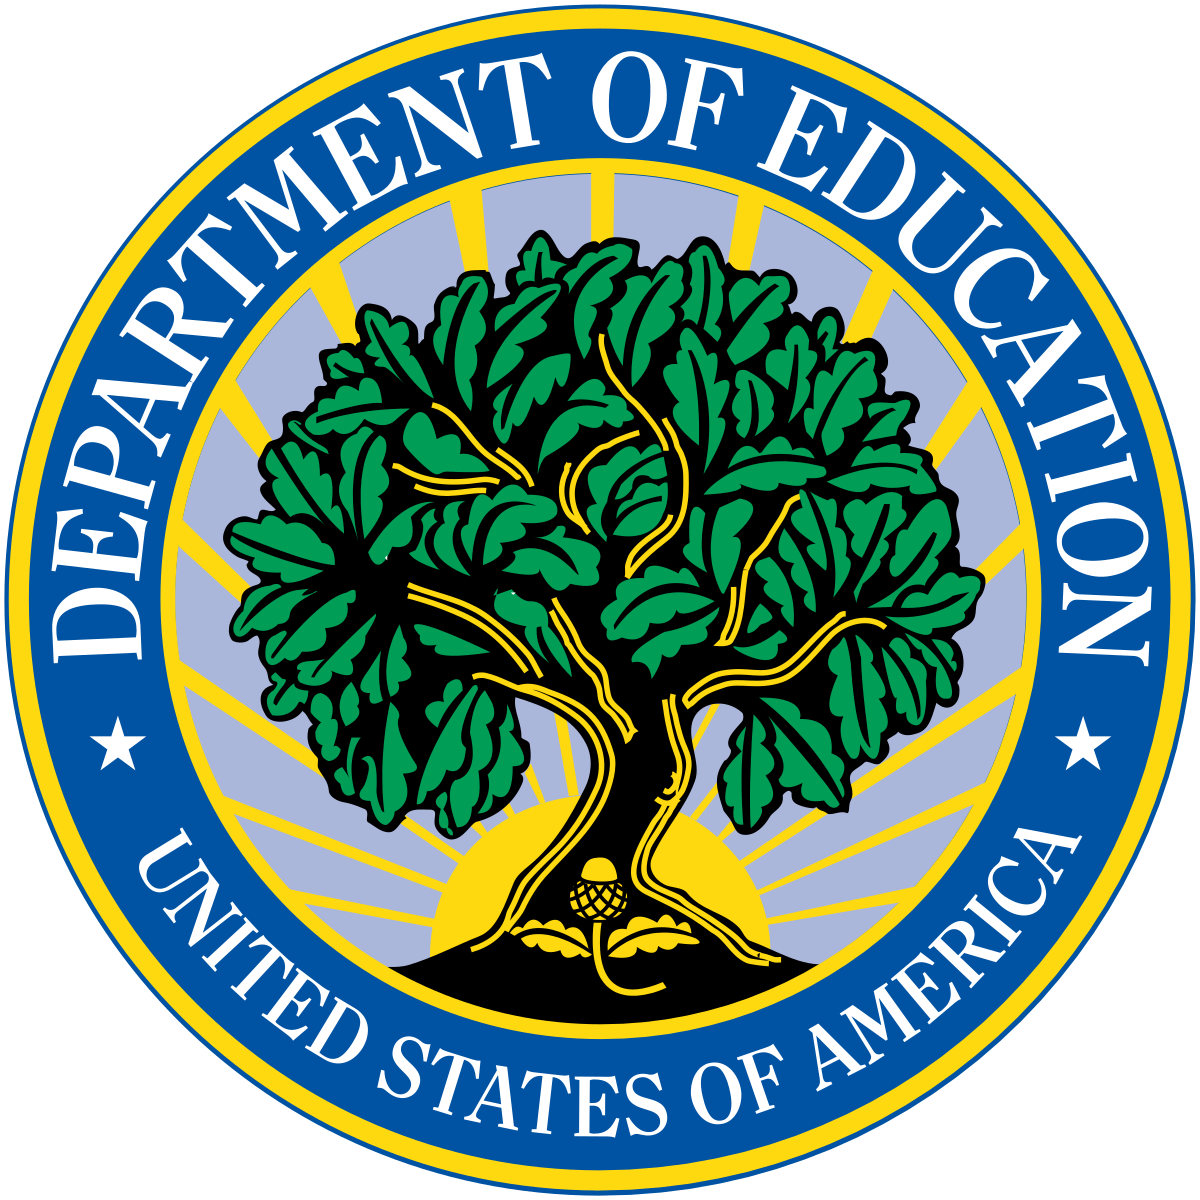 Department Of Education – United States of America